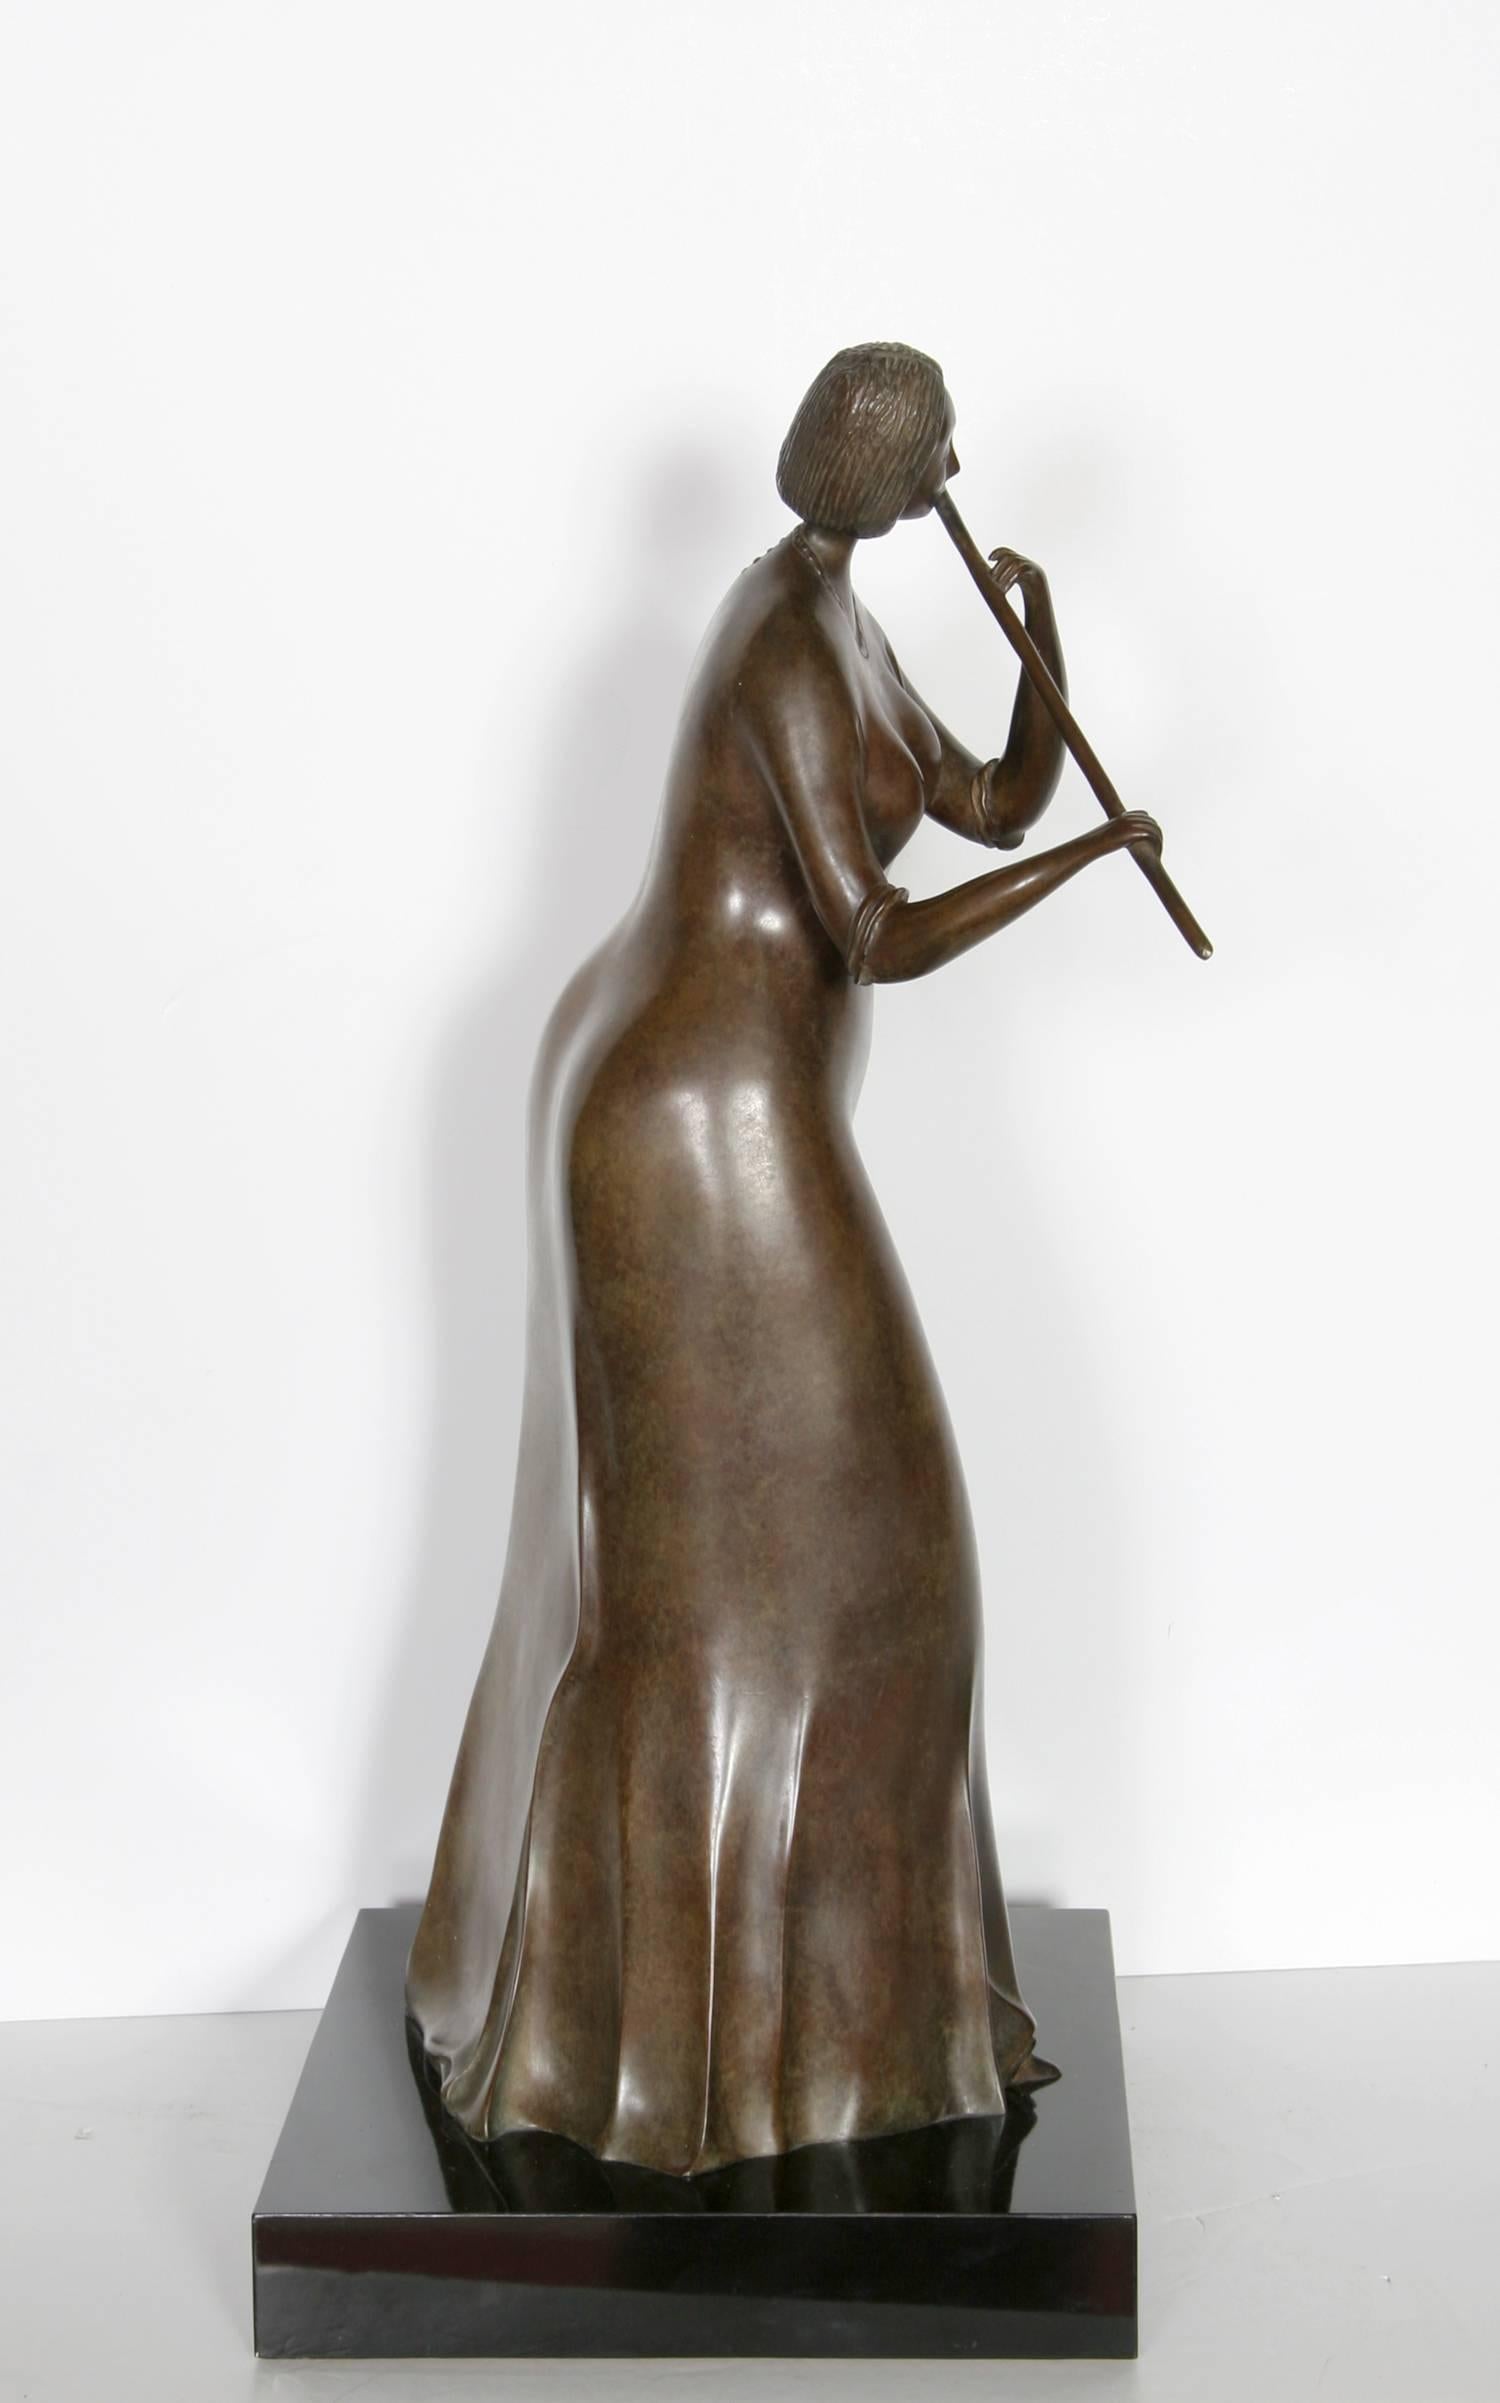 The Flautist - Contemporary Sculpture by Branko Bahunek